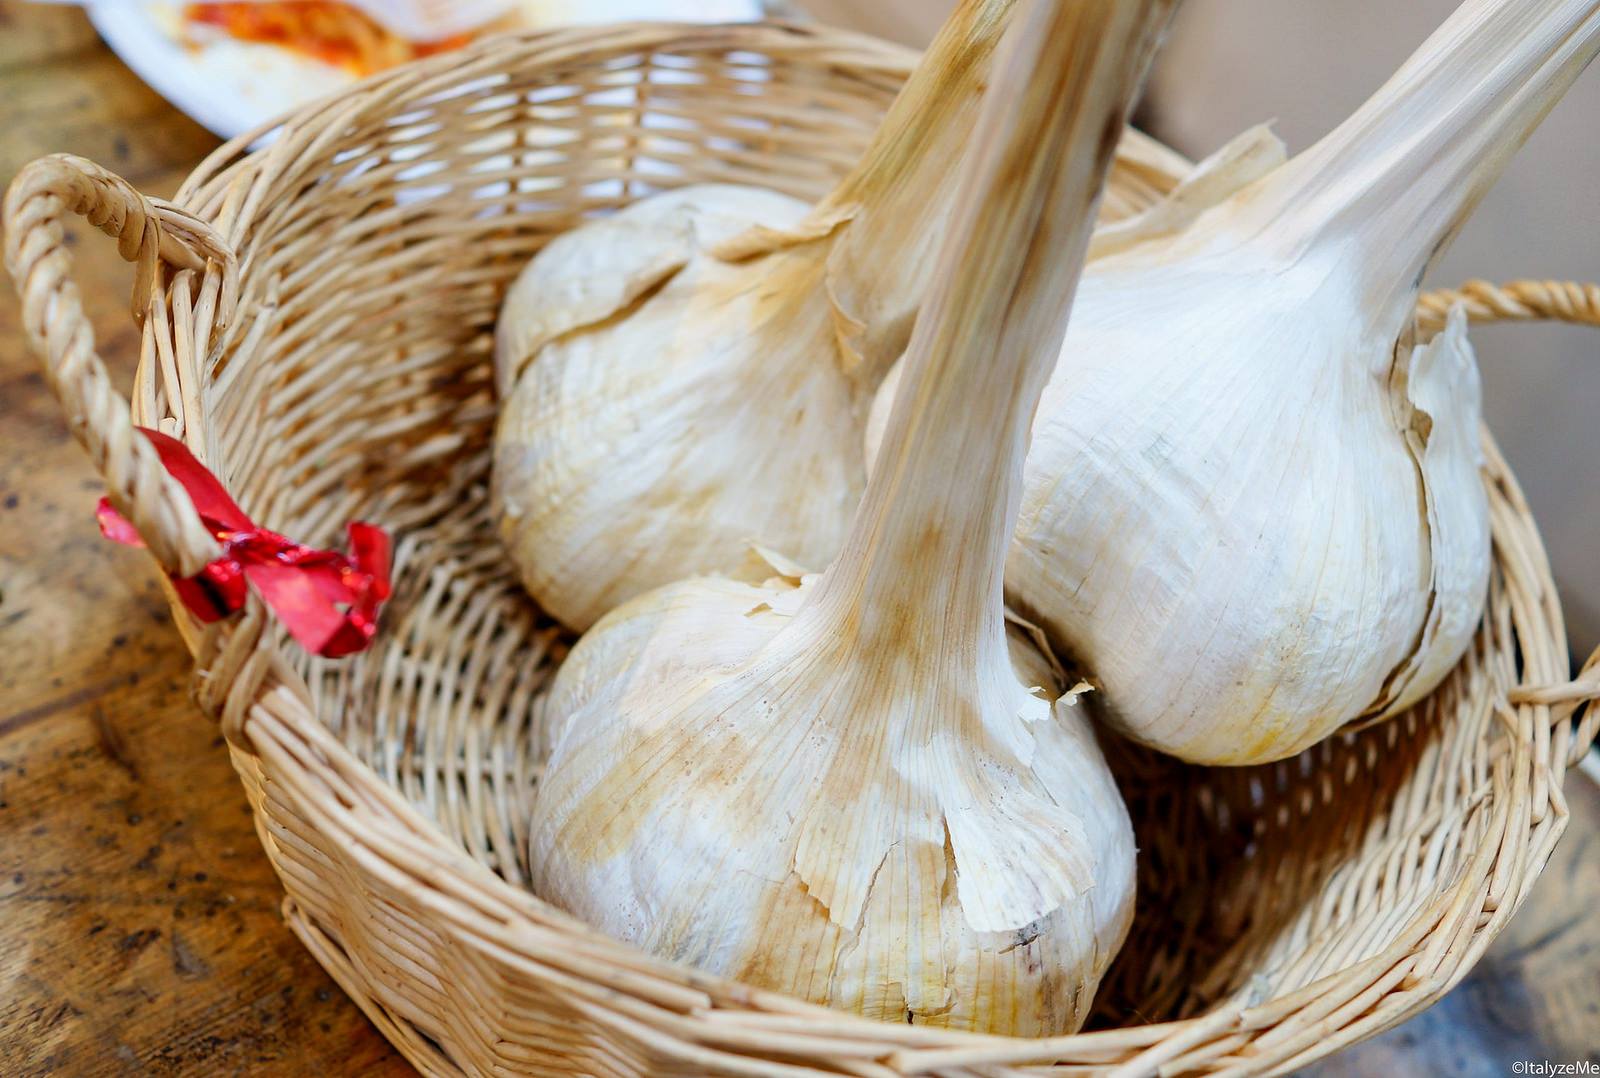 From the garlic to the Chianina: in Valdichiana everything is “giant”.